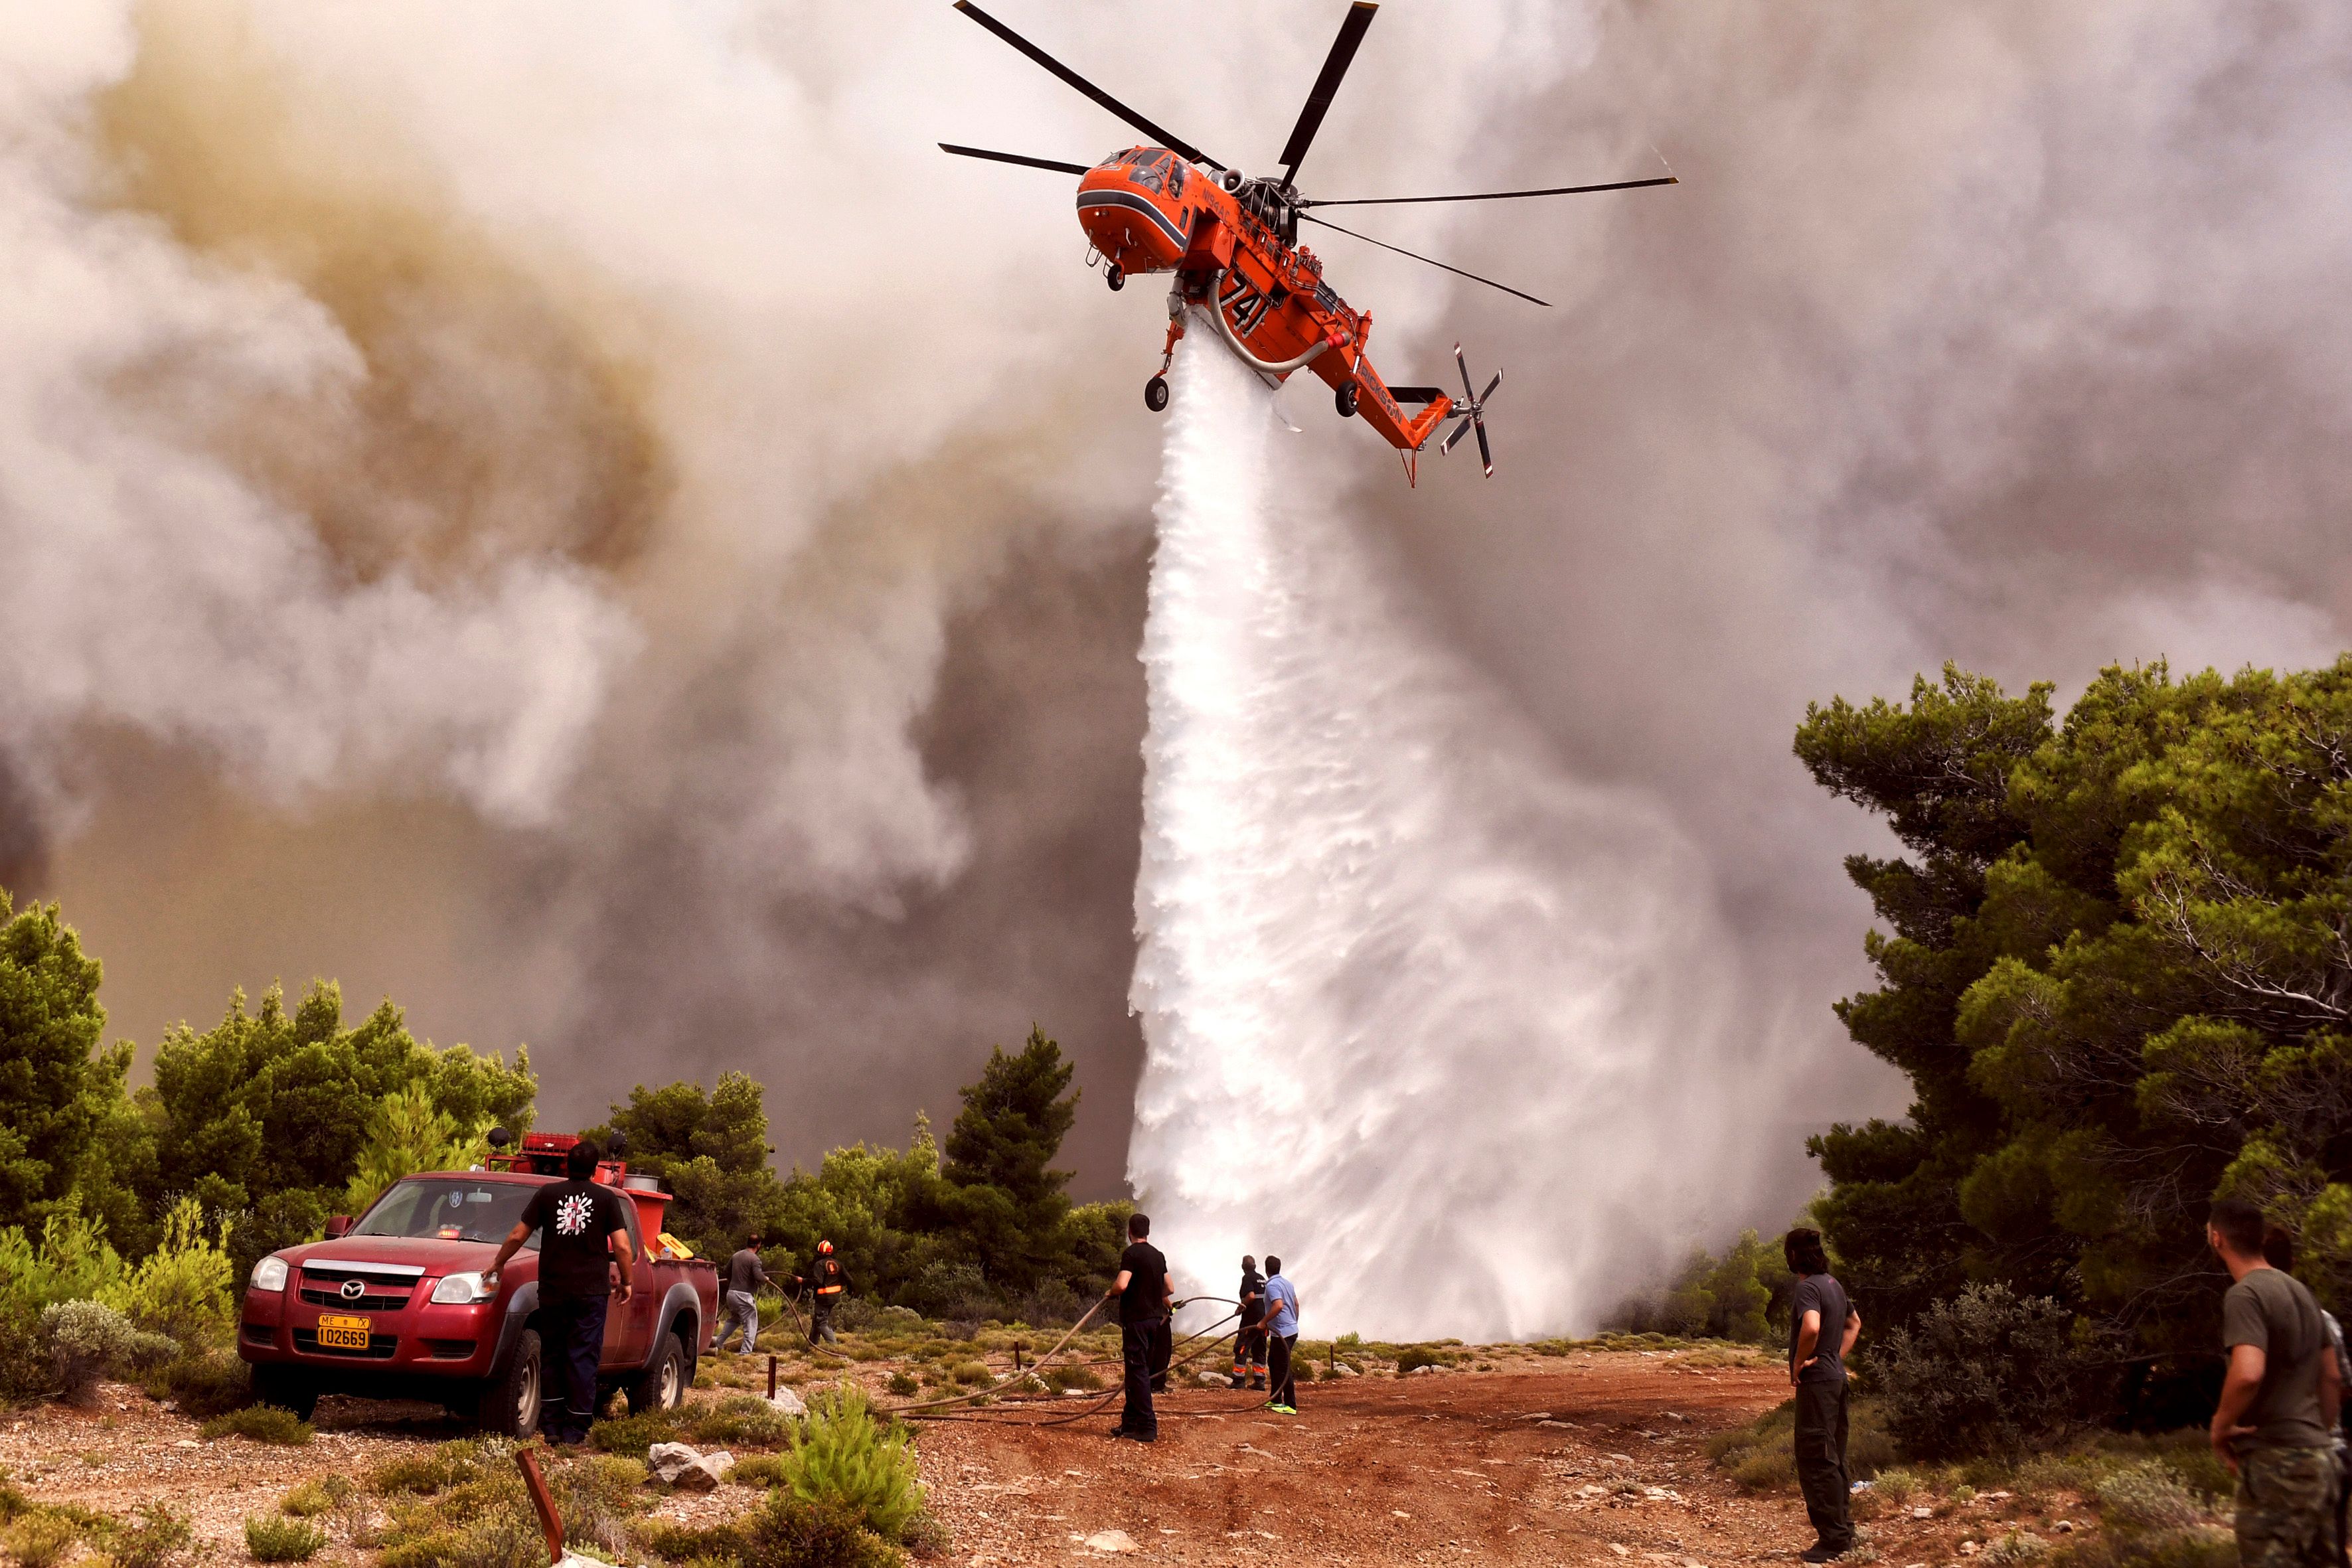 A firefighting helicopter drops water to extinguish flames during a wildfire at the village of Kineta, near Athens. Photo: VALERIE GACHE/AFP/Getty Images